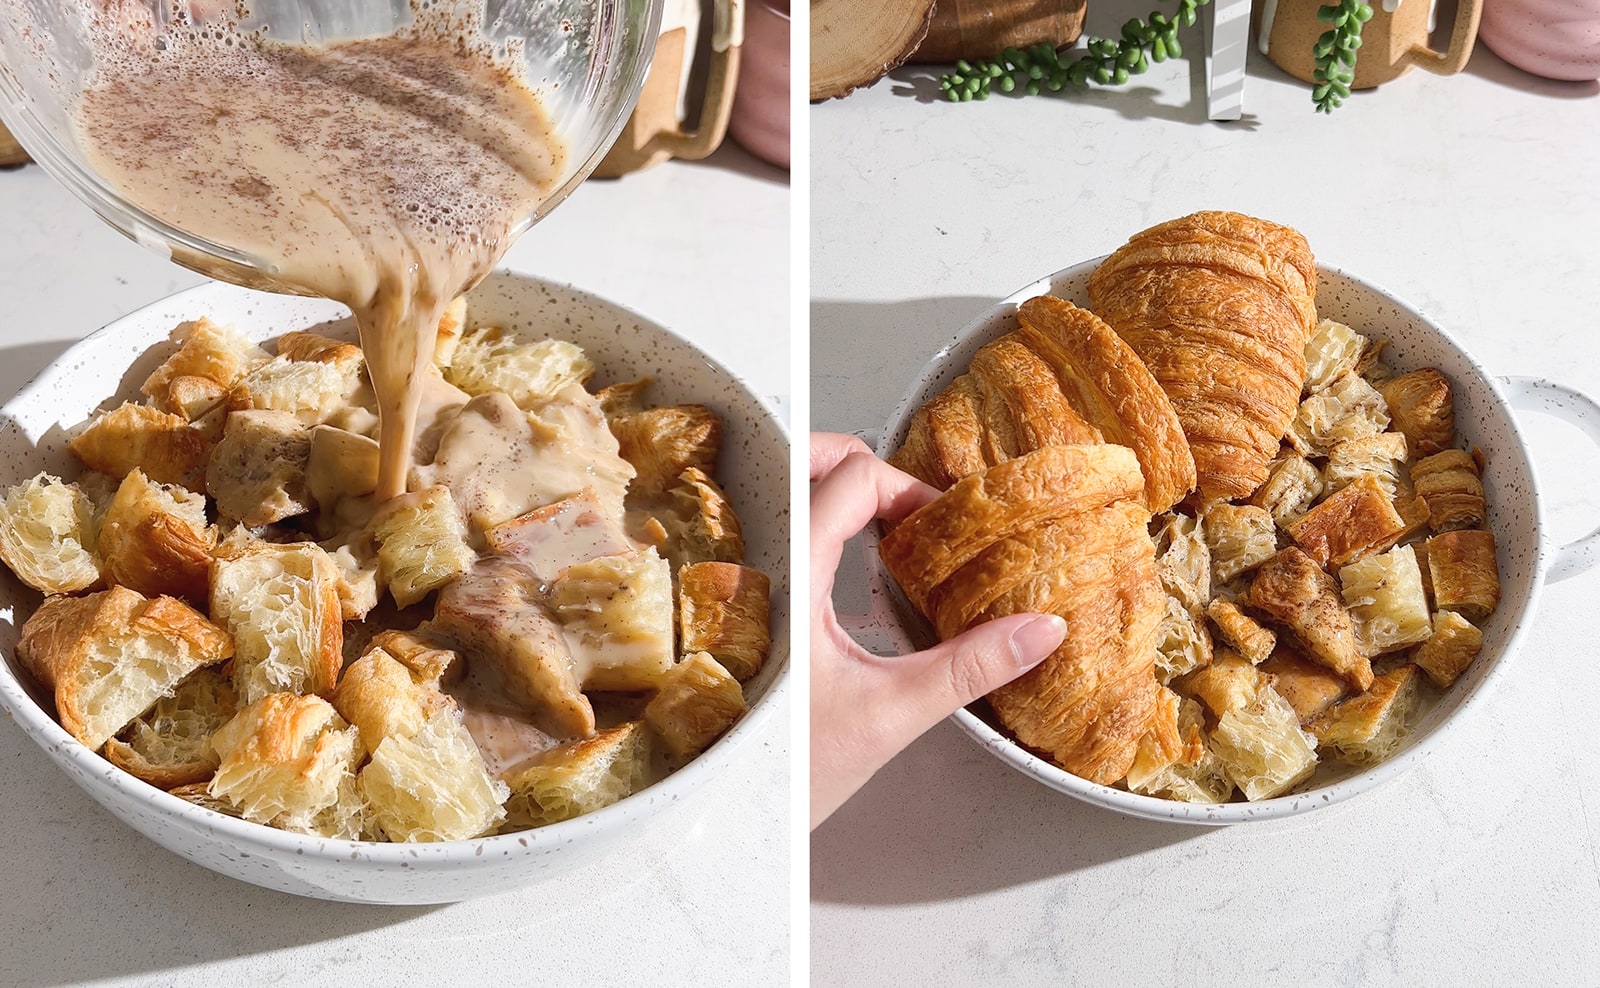 Left to right: pouring milk mixture over croissant cubes in baking dish, hand placing croissant halves on top of baking dish.